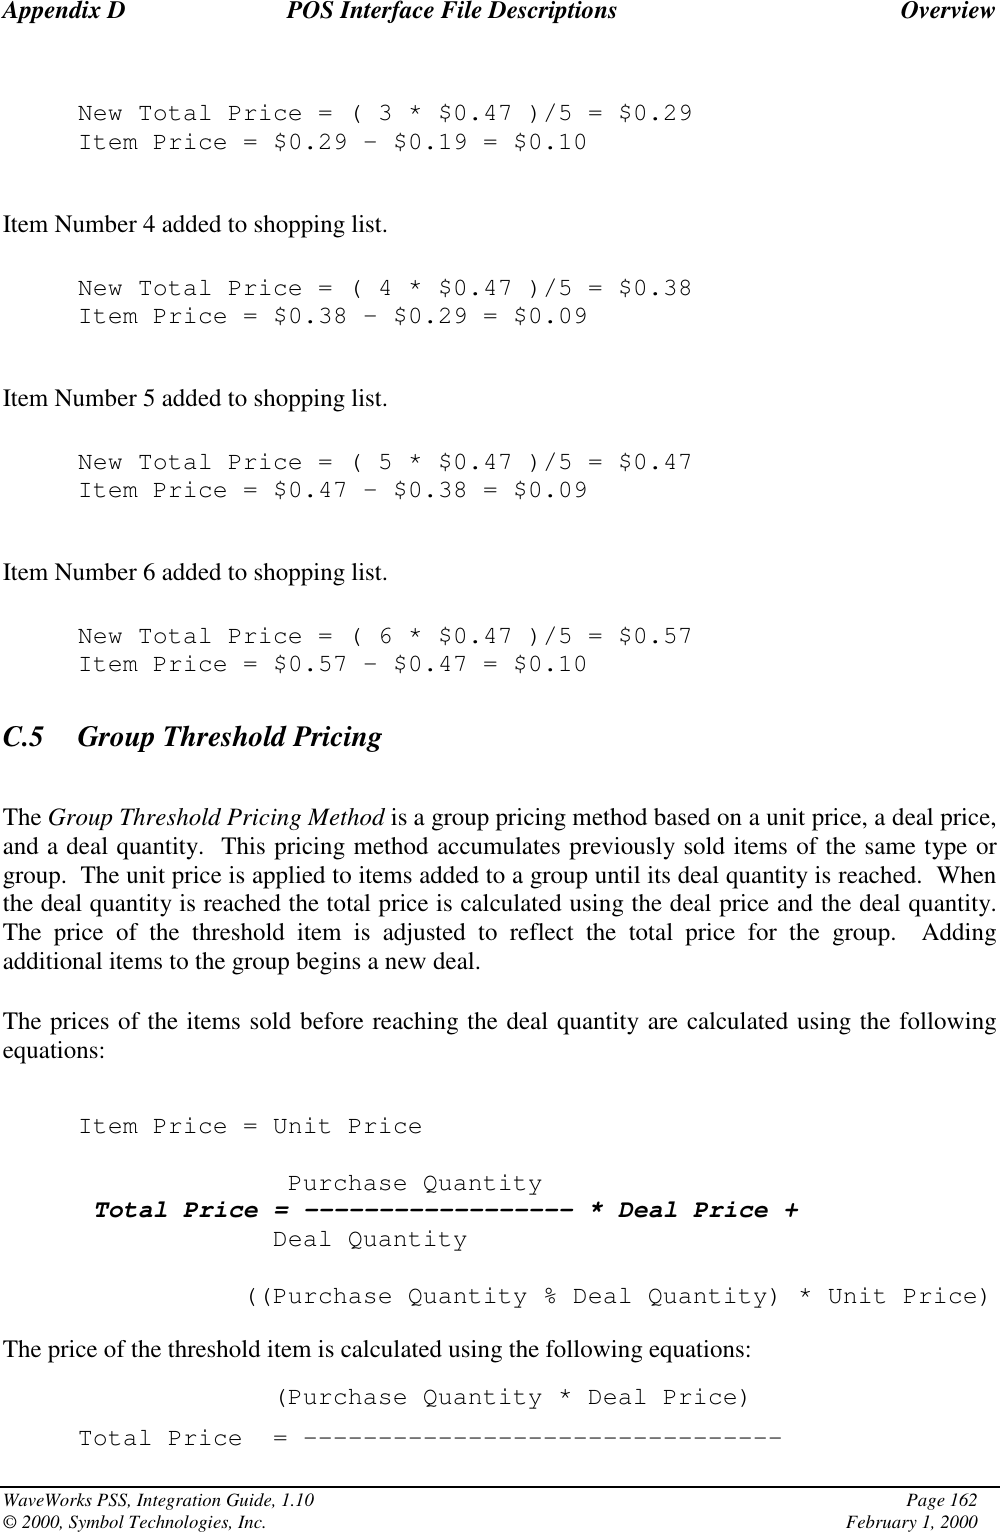 Appendix D POS Interface File Descriptions OverviewWaveWorks PSS, Integration Guide, 1.10 Page 162© 2000, Symbol Technologies, Inc. February 1, 2000New Total Price=(3*$0.47 )/5 = $0.29Item Price = $0.29 – $0.19 = $0.10Item Number 4 added to shopping list.New Total Price=(4*$0.47 )/5 = $0.38Item Price = $0.38 – $0.29 = $0.09Item Number 5 added to shopping list.New Total Price=(5*$0.47 )/5 = $0.47Item Price = $0.47 – $0.38 = $0.09Item Number 6 added to shopping list.New Total Price=(6*$0.47 )/5 = $0.57Item Price = $0.57 – $0.47 = $0.10C.5 Group Threshold PricingThe Group Threshold Pricing Method is a group pricing method based on a unit price, a deal price,and a deal quantity.  This pricing method accumulates previously sold items of the same type orgroup.  The unit price is applied to items added to a group until its deal quantity is reached.  Whenthe deal quantity is reached the total price is calculated using the deal price and the deal quantity.The price of the threshold item is adjusted to reflect the total price for the group.  Addingadditional items to the group begins a new deal.The prices of the items sold before reaching the deal quantity are calculated using the followingequations:Item Price = Unit PricePurchase QuantityTotal Price = ------------------ * Deal Price +Deal Quantity((Purchase Quantity % Deal Quantity) * Unit Price)The price of the threshold item is calculated using the following equations:(Purchase Quantity * Deal Price)Total Price = --------------------------------